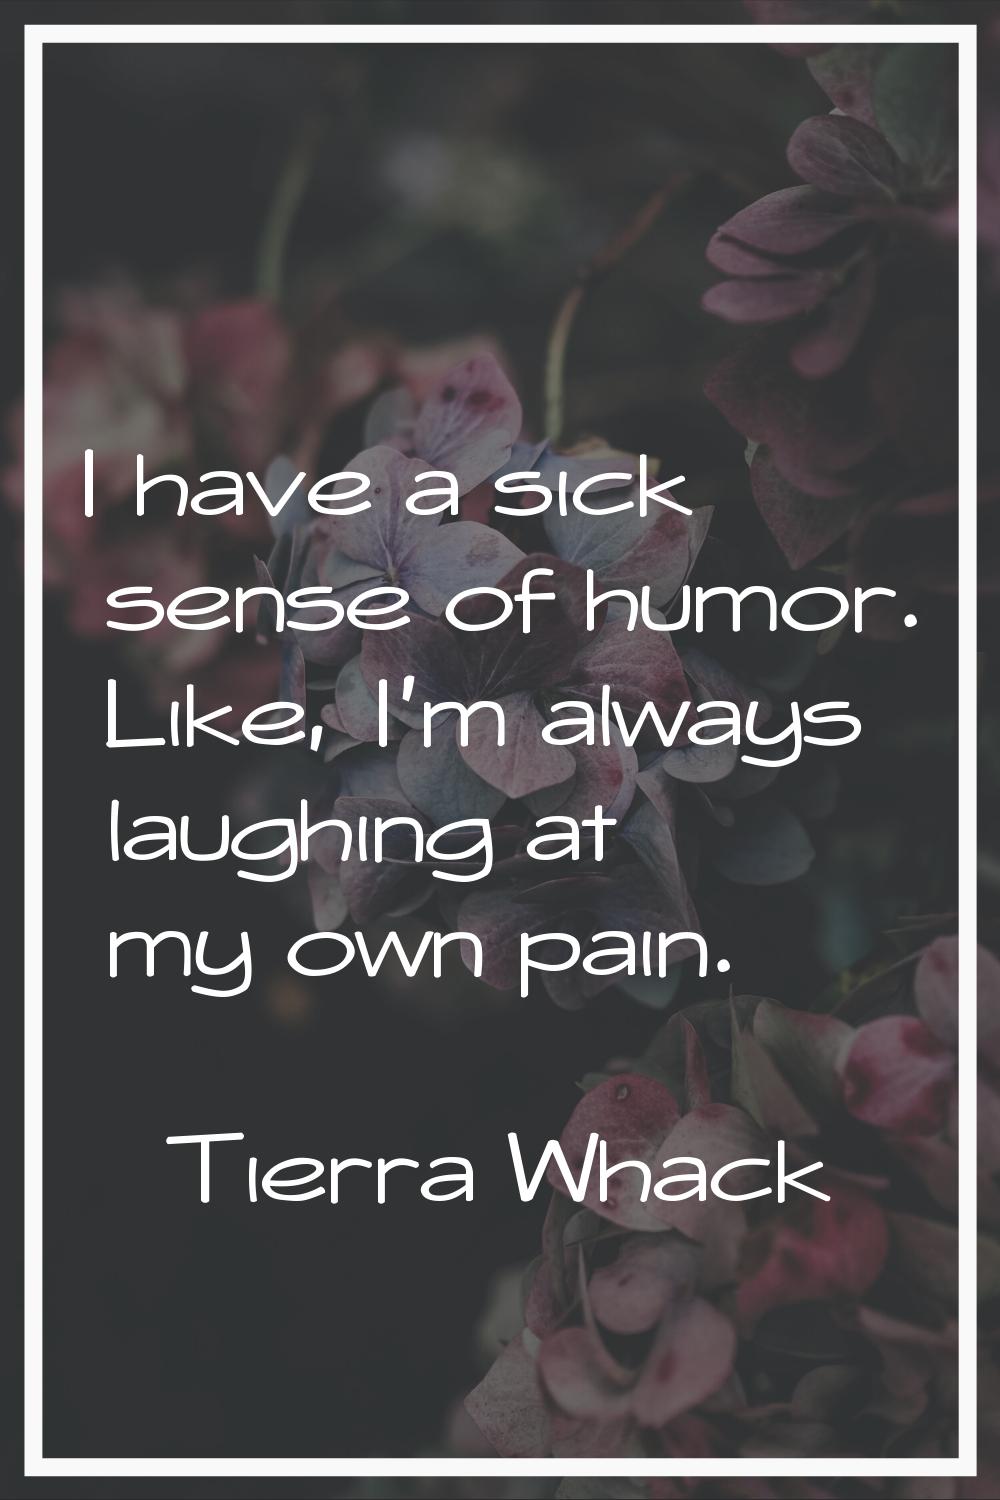 I have a sick sense of humor. Like, I'm always laughing at my own pain.